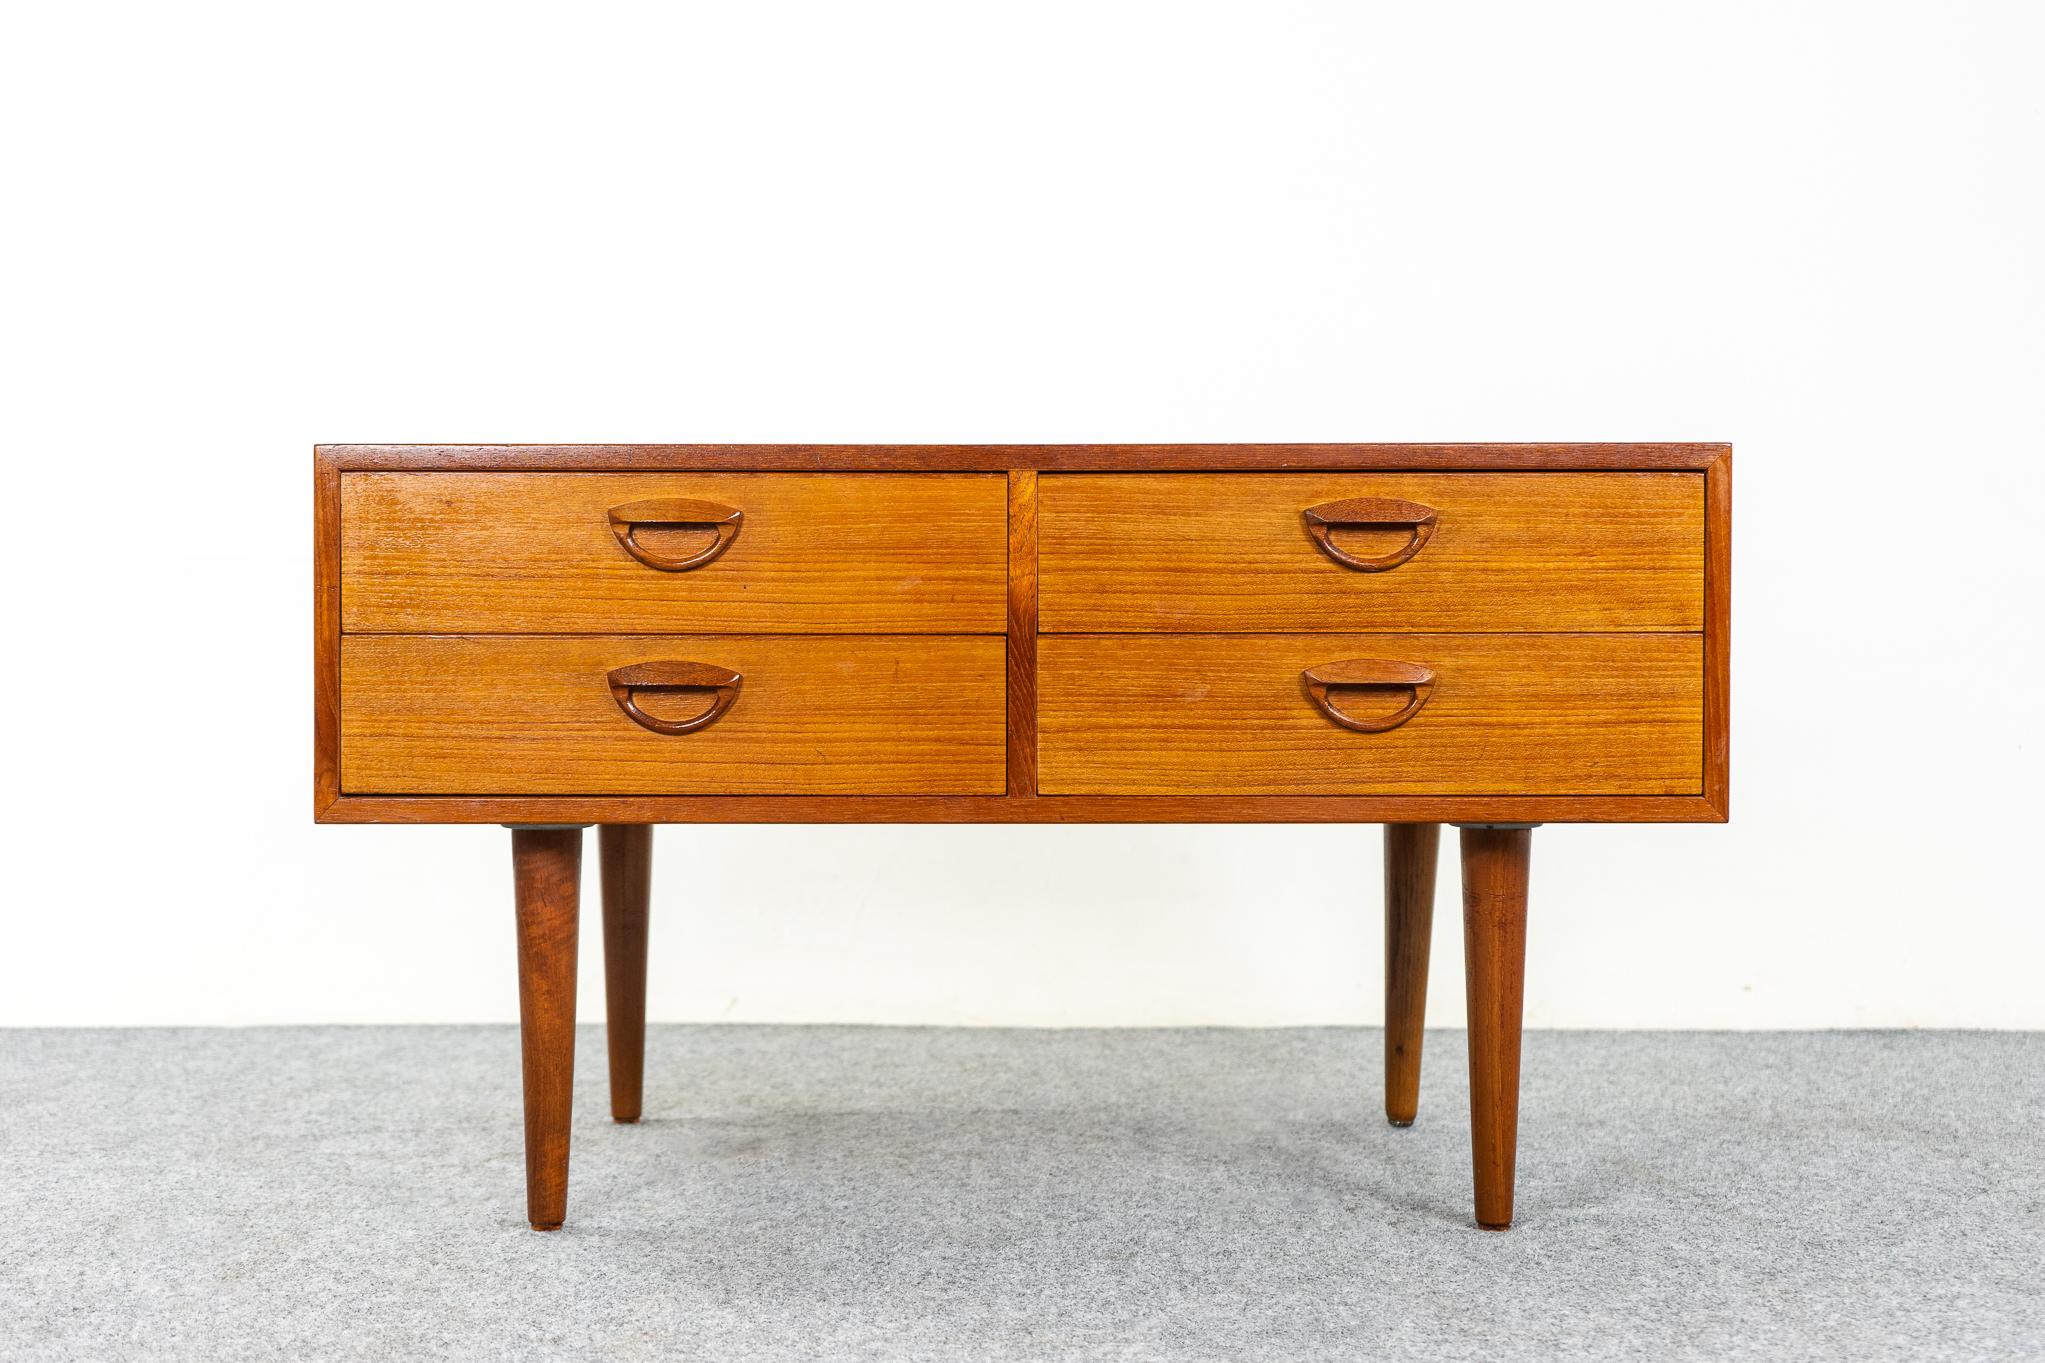 Teak Danish modern bedside table by Kai Kristiansen, circa 1960's. Beautifully veneered case rests on slender, tapered legs. Sleek drawers with dovetail construction and sweet handles. Add the extra storage you've always needed!

Please inquire for